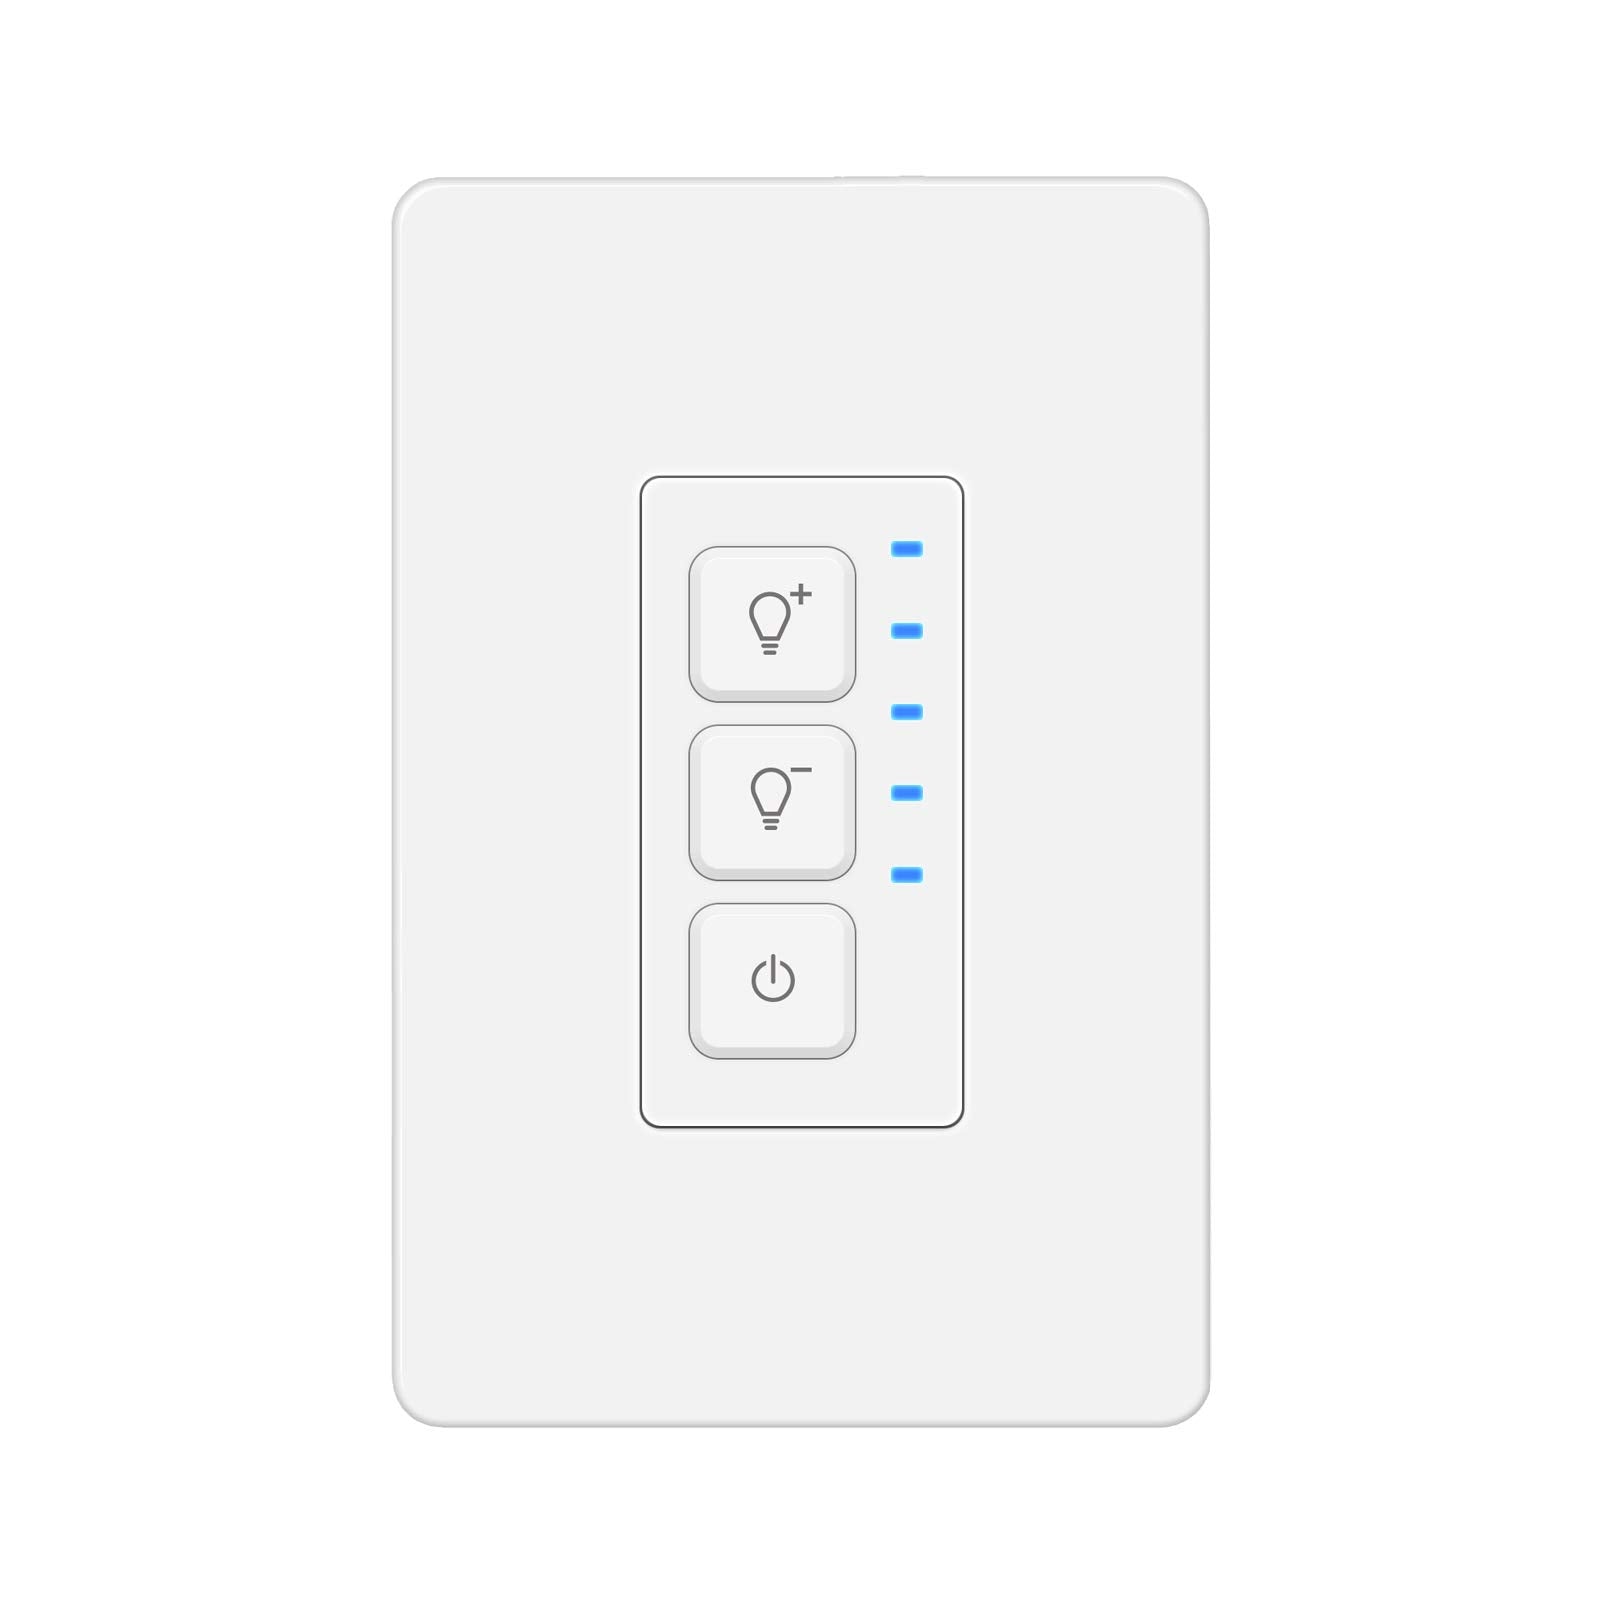 WiFi Smart in-Wall Light Switch with Timer Function Compatible with Alexa  and Google Assistant (4 Pack) BN-LINK